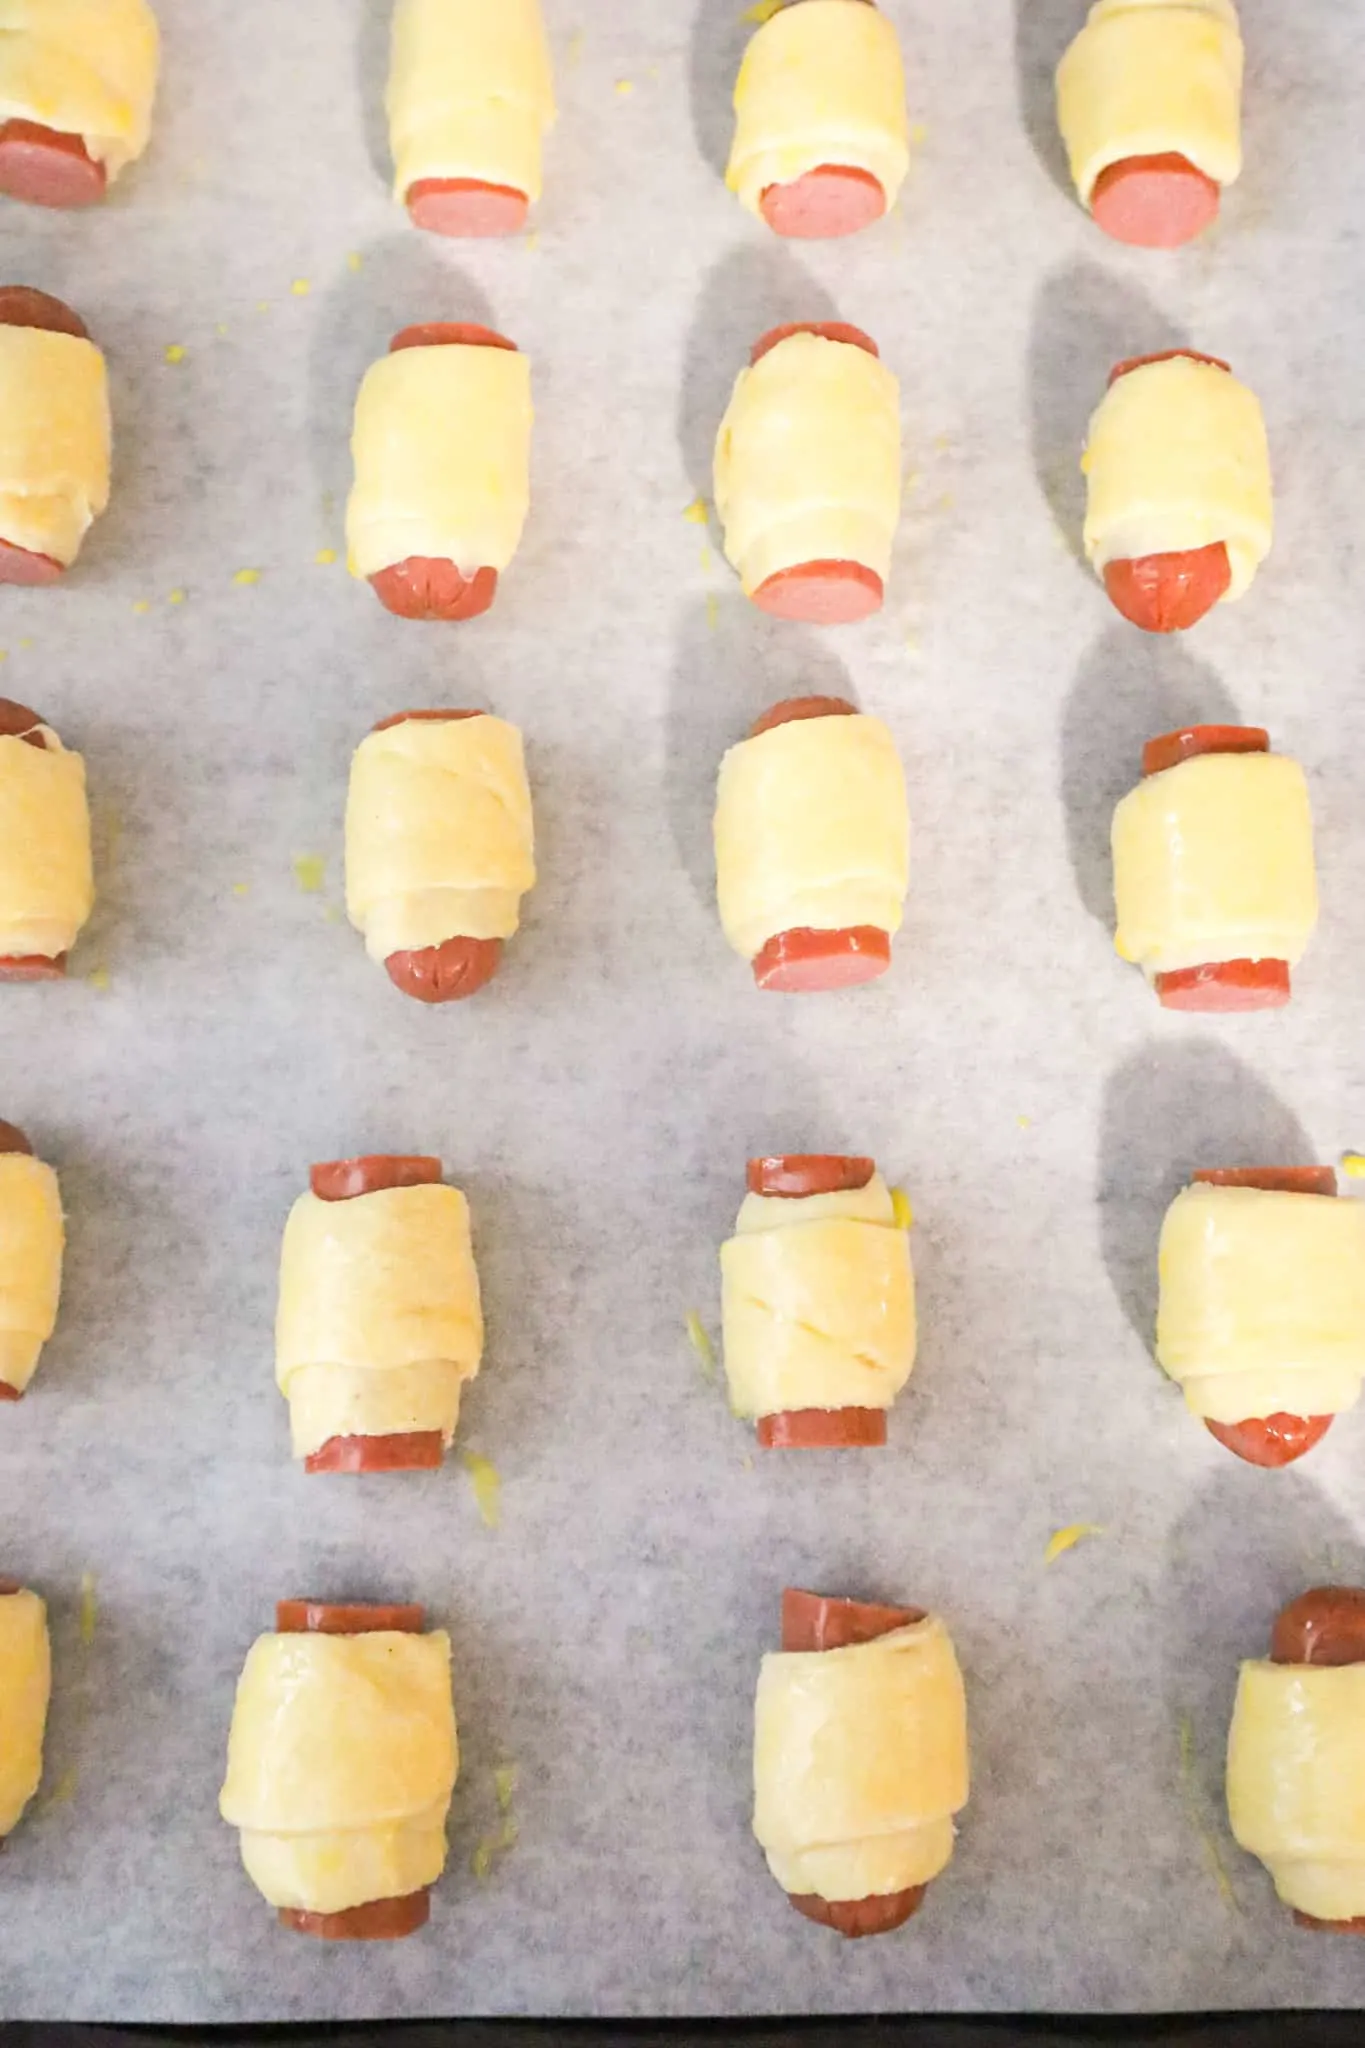 hot dog pieces wrapped in crescent dough and brushed with egg wash